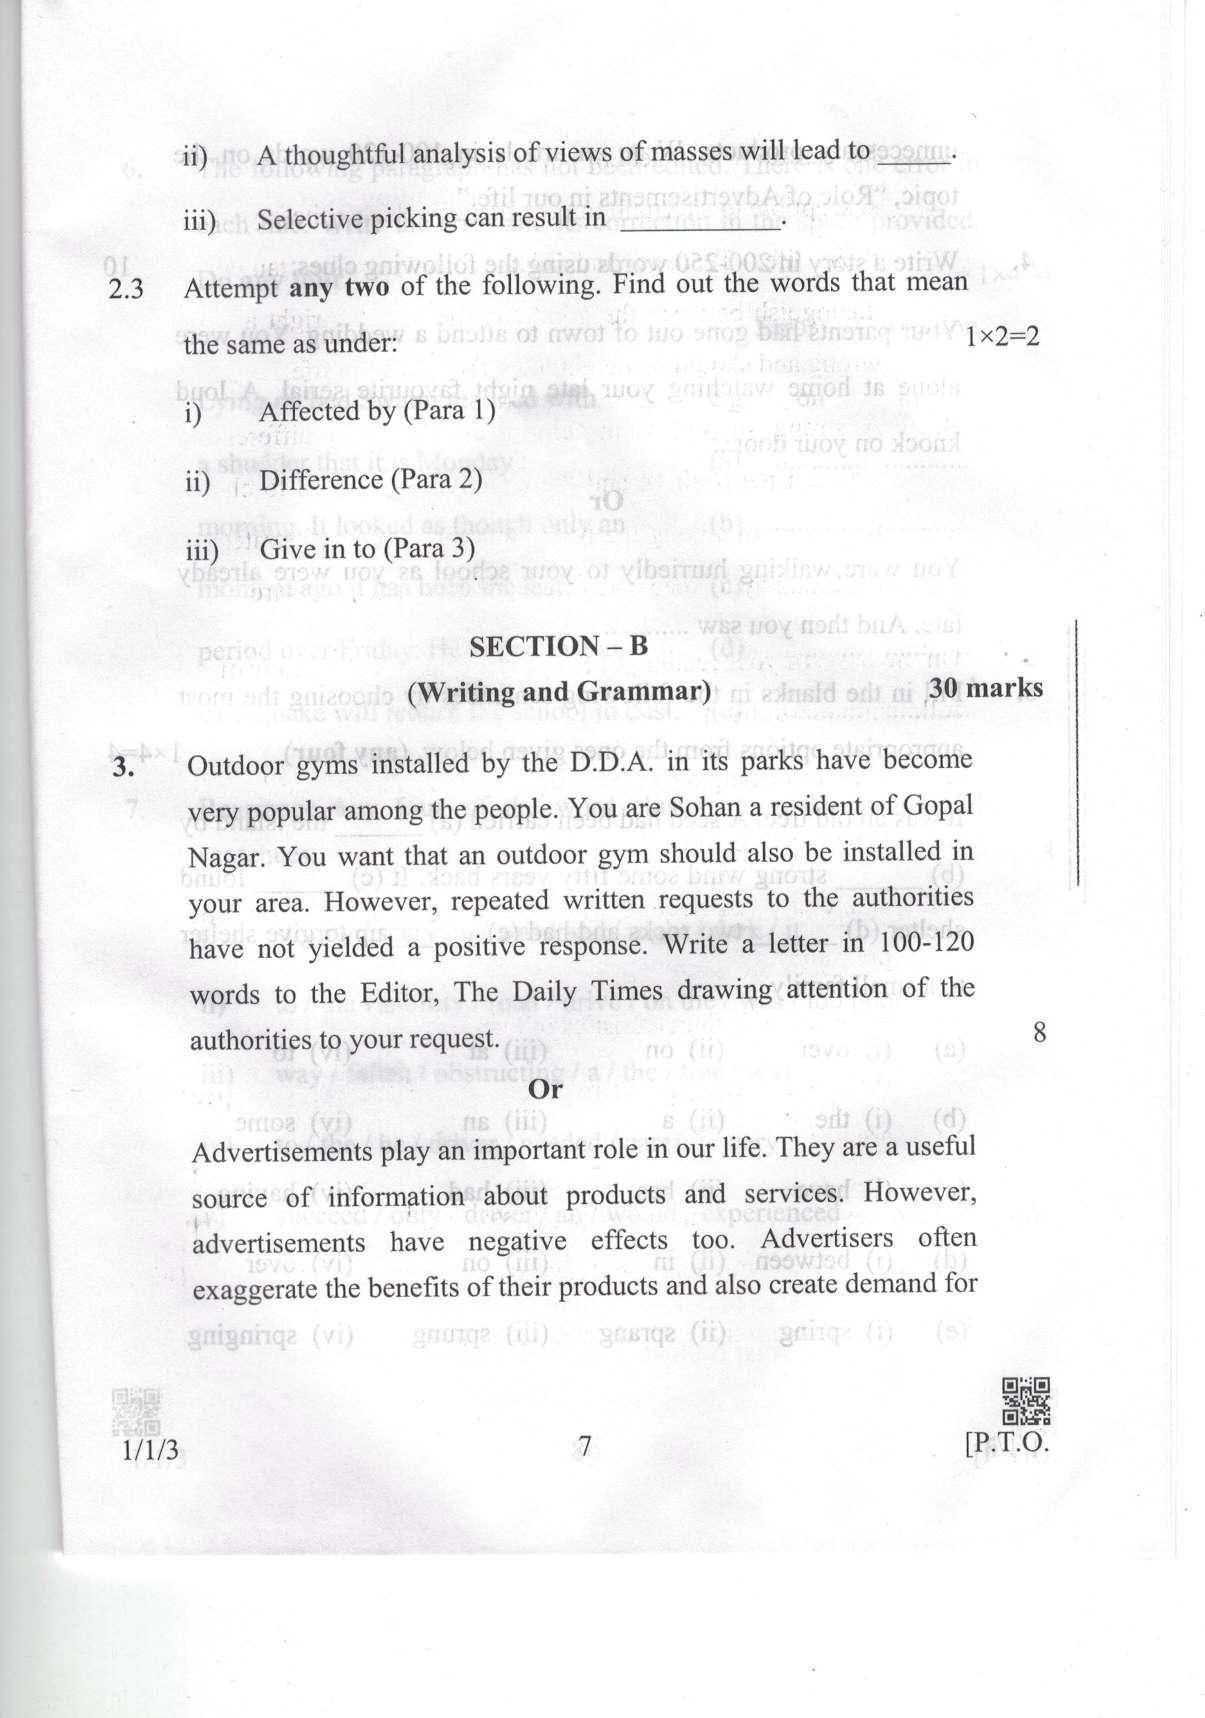 CBSE Class 10 1-1-3 Eng. Comm. 2019 Question Paper - Page 7